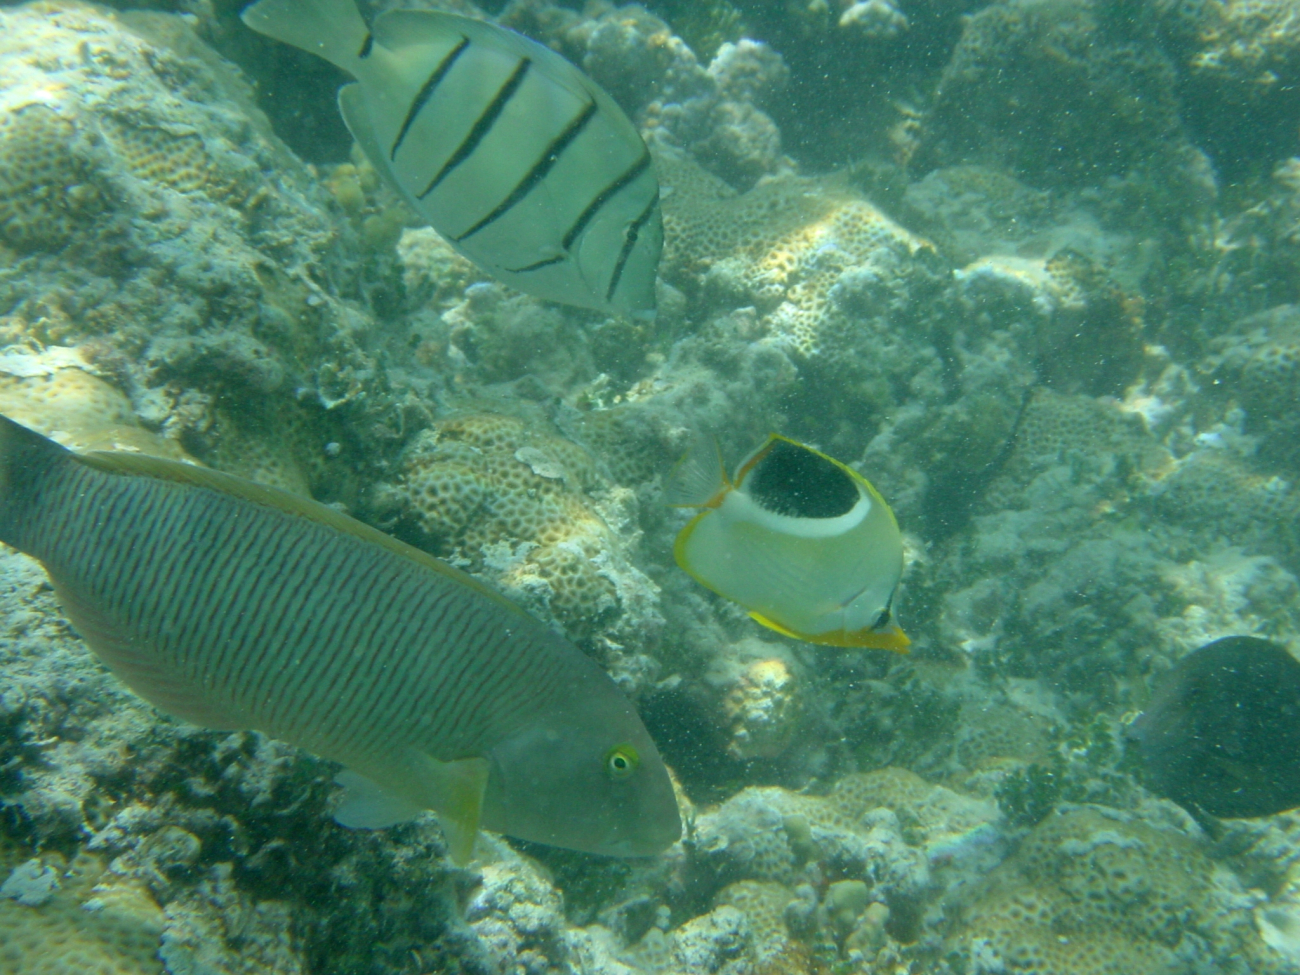 Convict tang (Acanthurus triostegus) at top, saddleback butterfly fish(Chaetodon ephippium) in middle, and old woman wrasse (Thalassoma ballieui)on bottom left